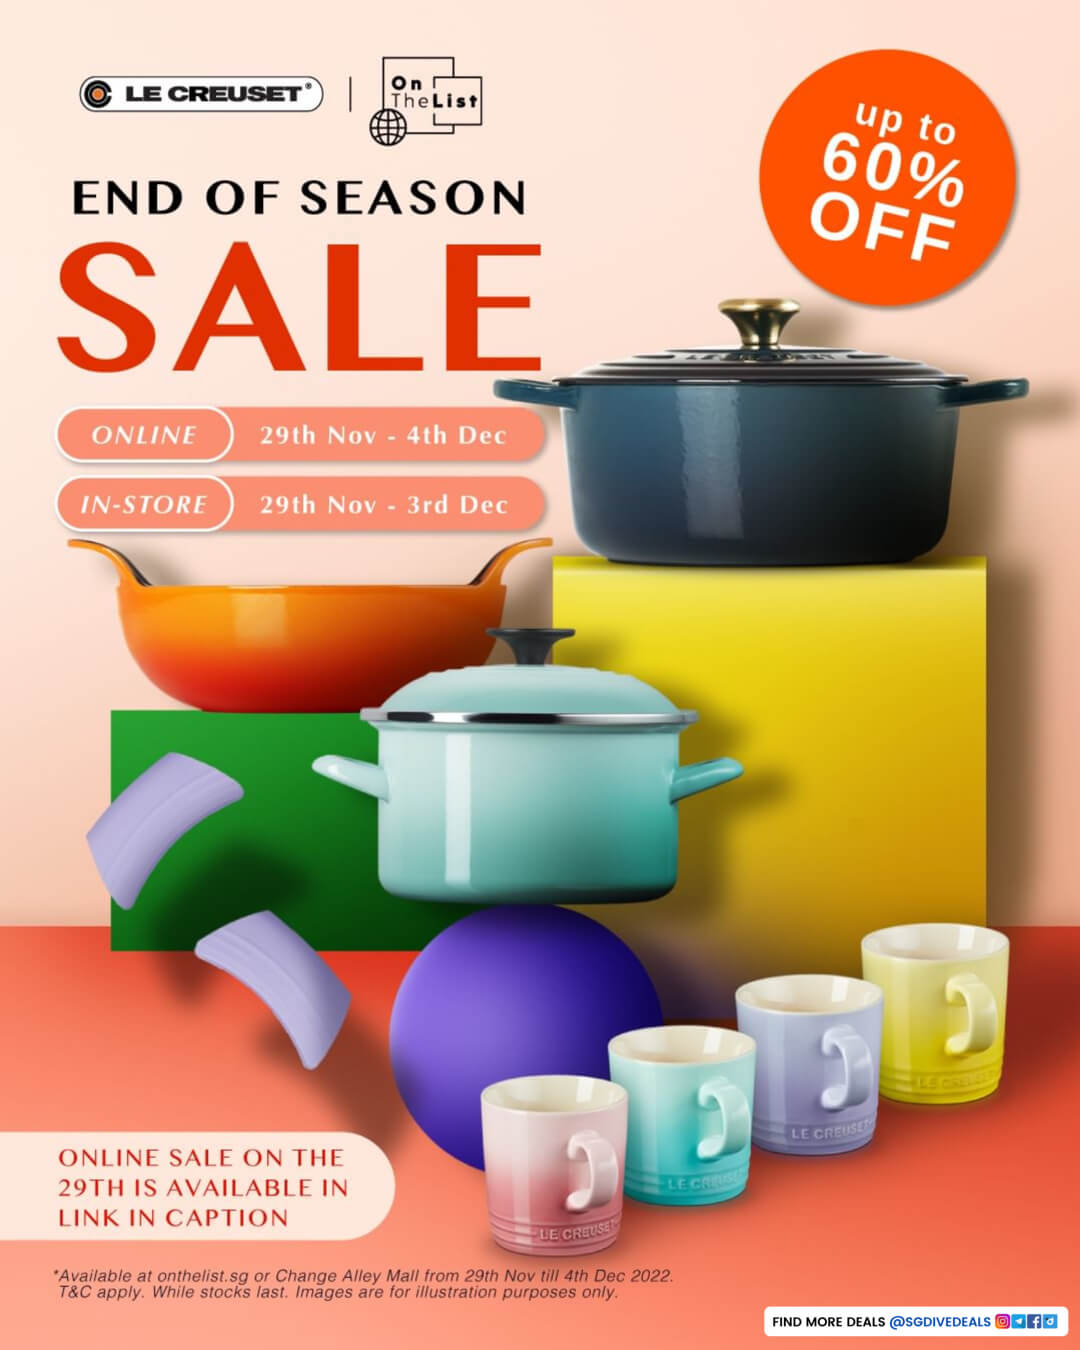 Le Creuset,End Of Season Sale up to 60% Off